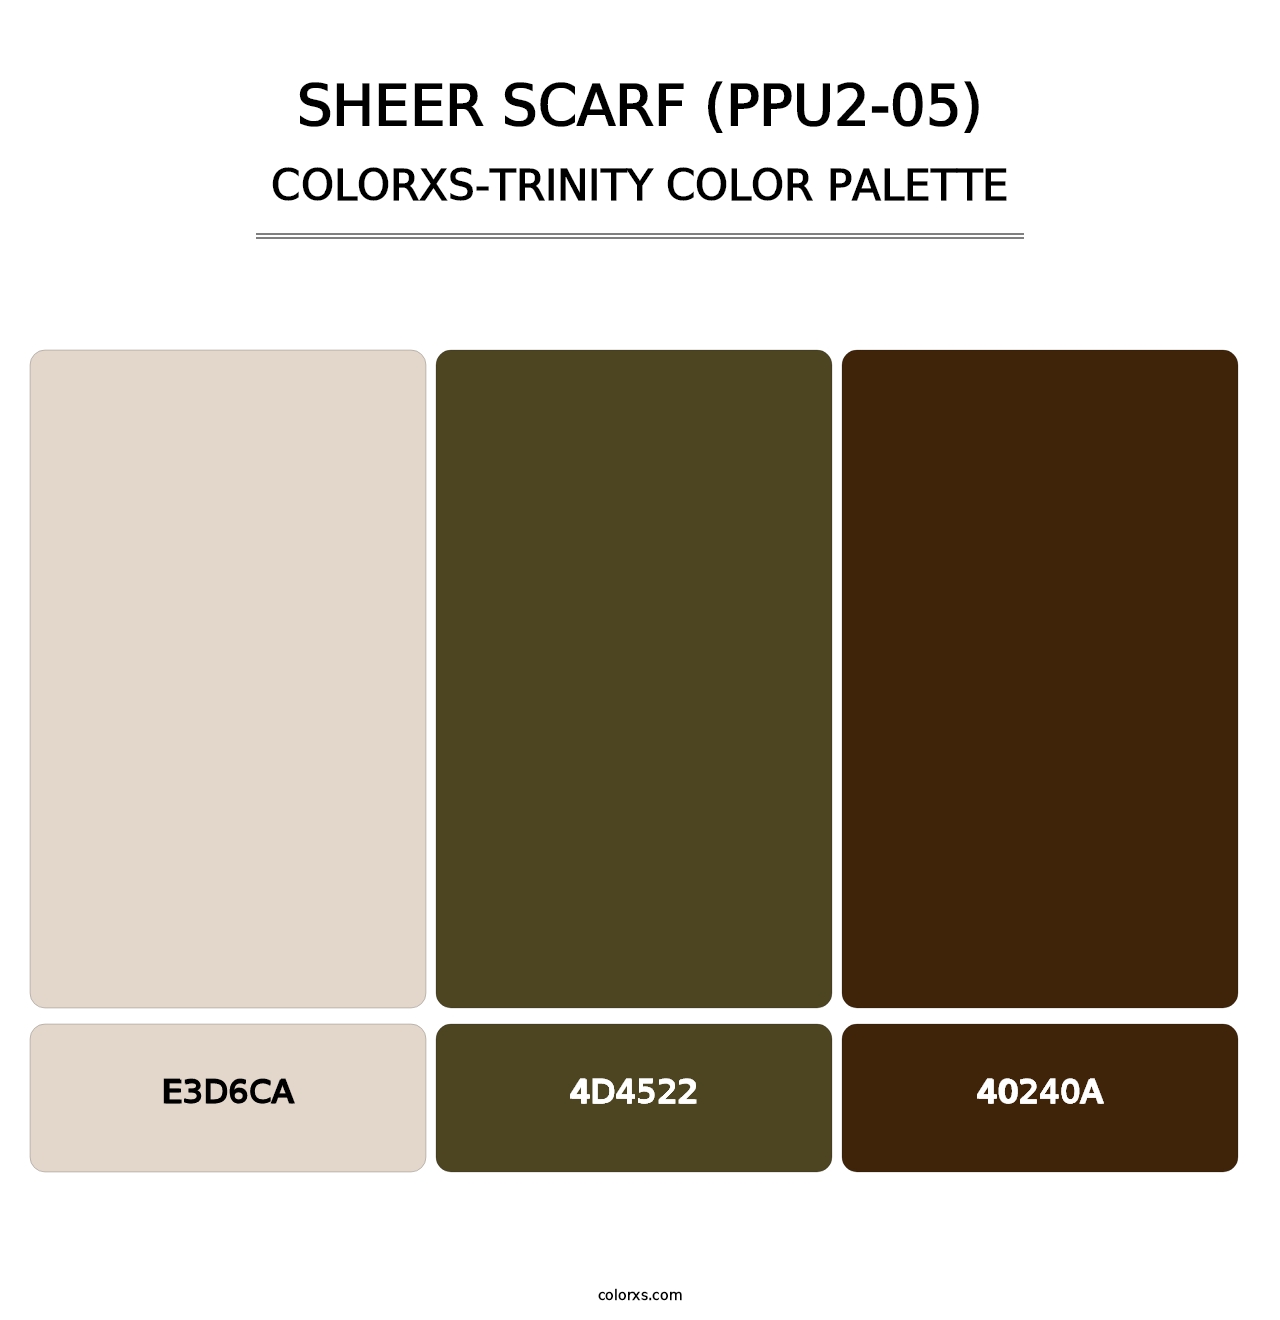 Sheer Scarf (PPU2-05) - Colorxs Trinity Palette